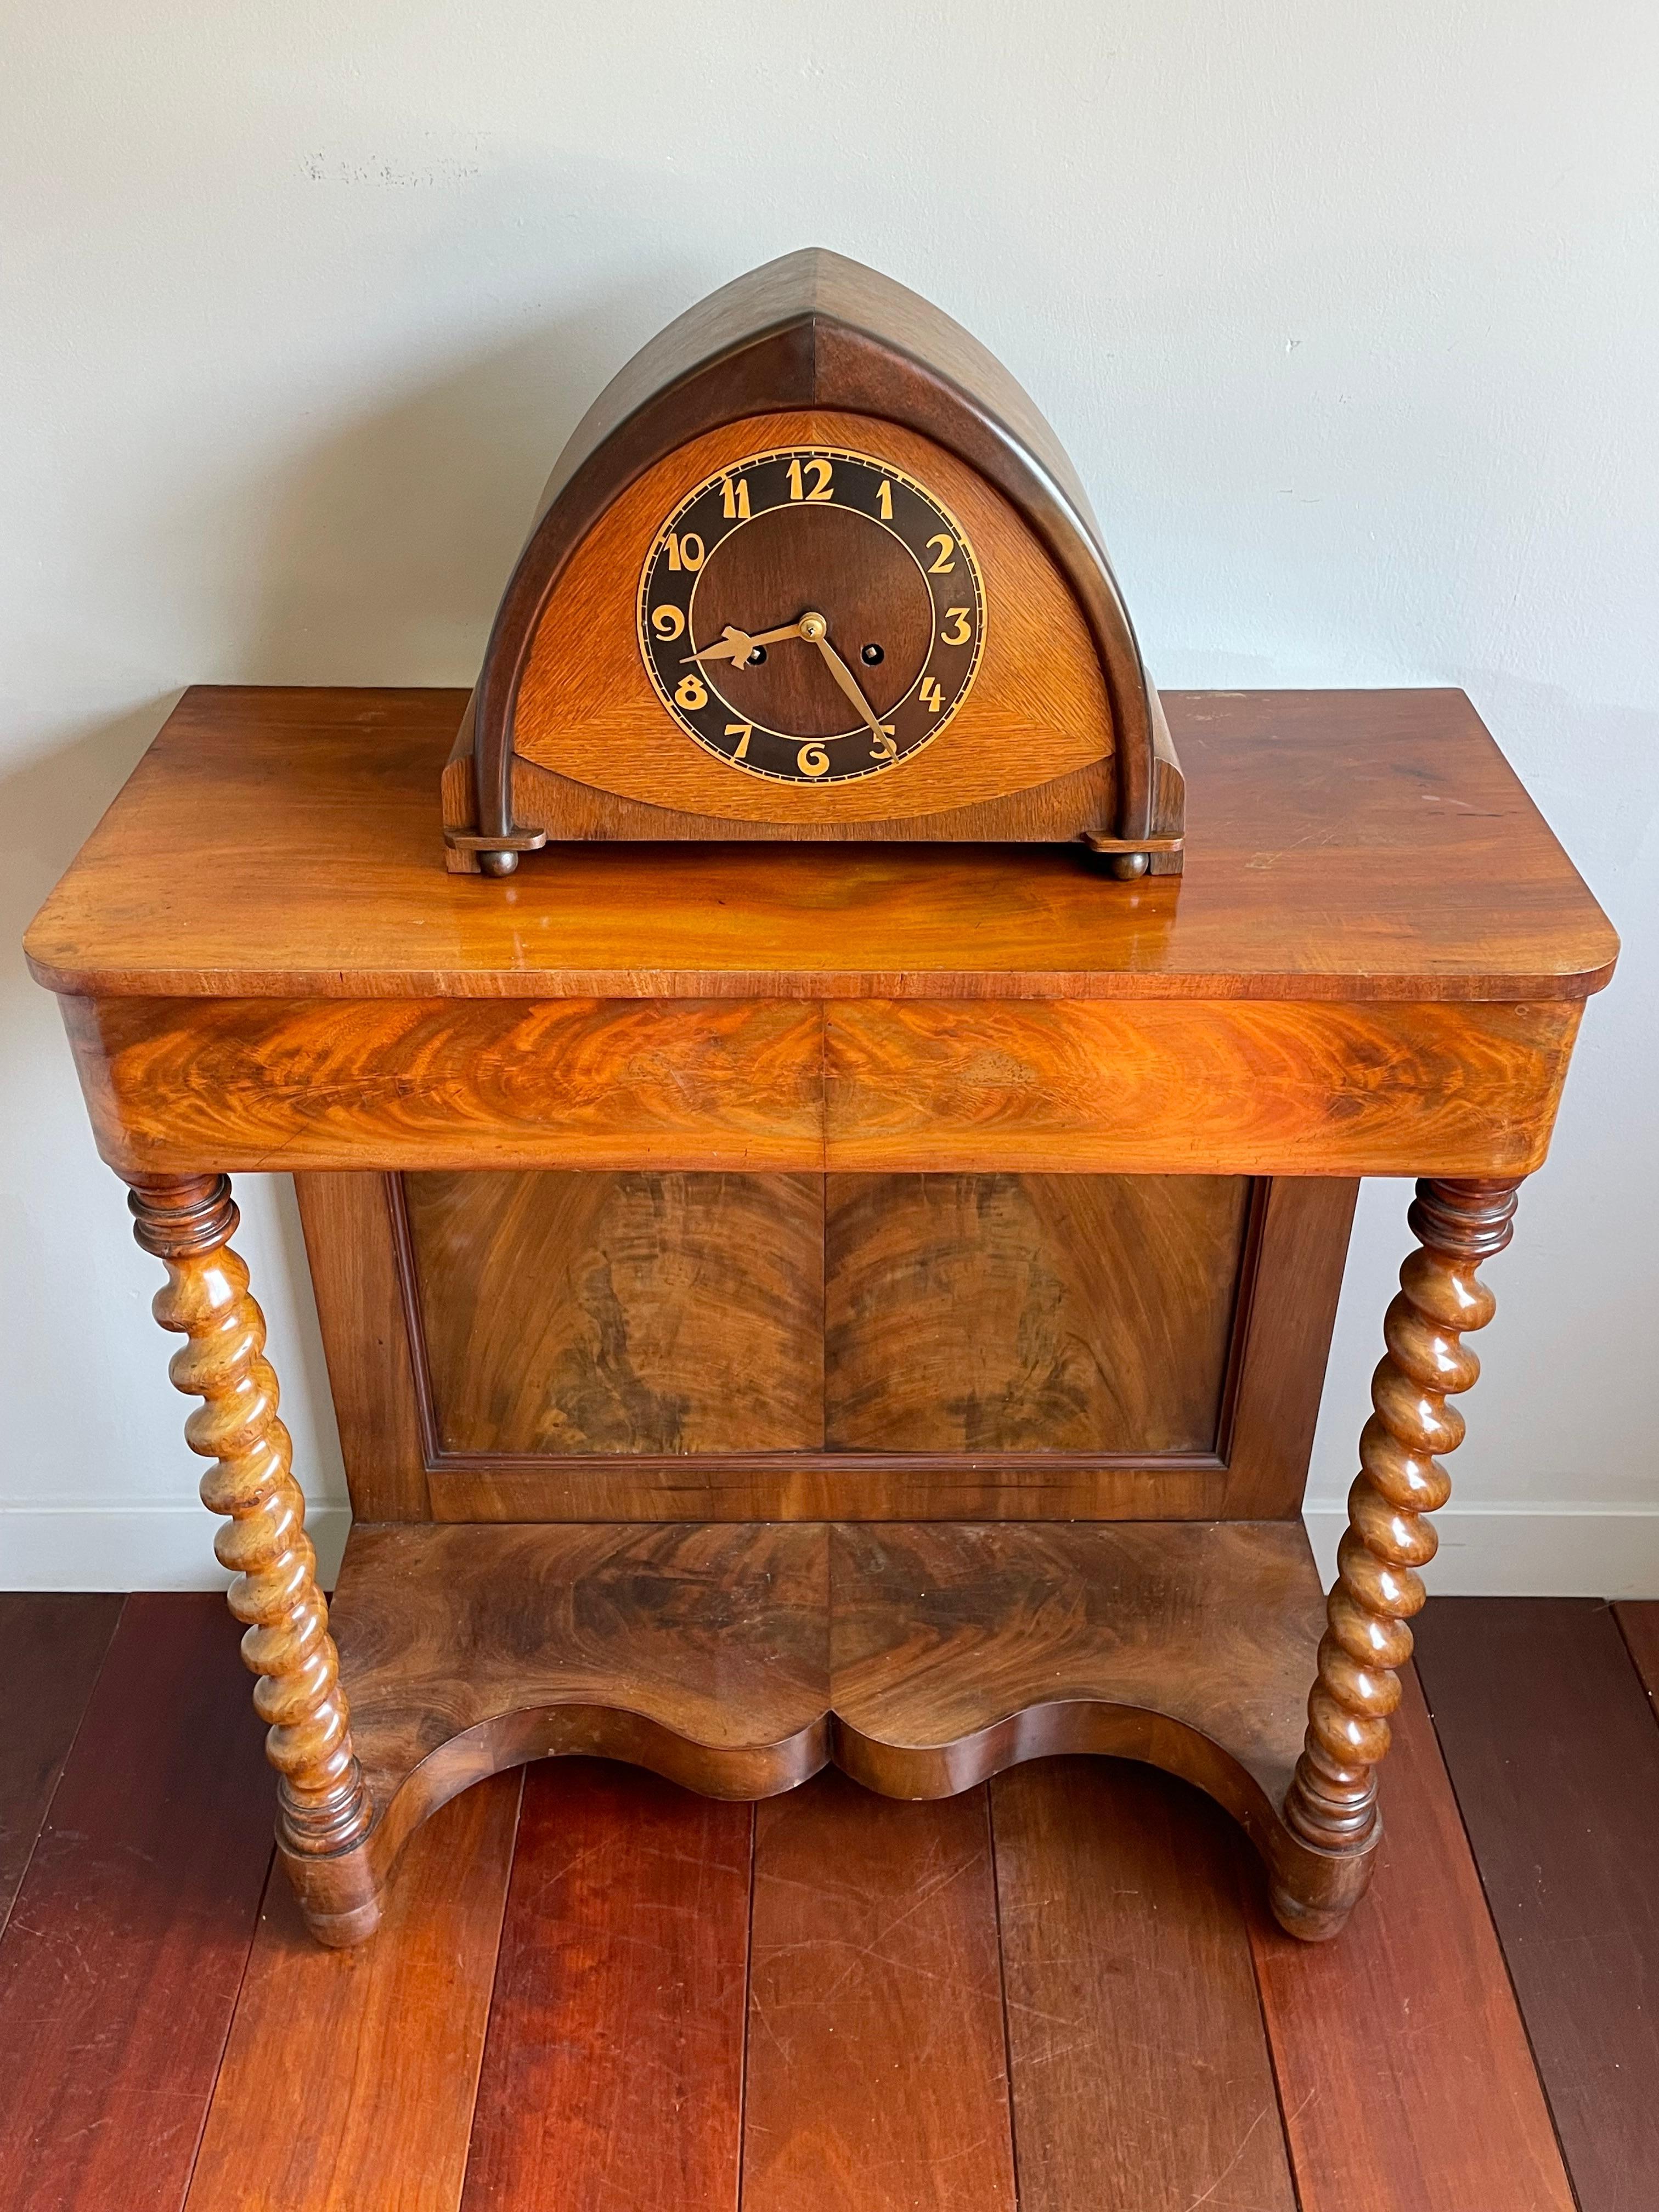 Beautiful design and perfectly running Arts & Crafts table pendulum clock.

If you are looking for a great shape and excellent condition clock then this original specimen from the 1920s could be perfect for you. The combination of the dark